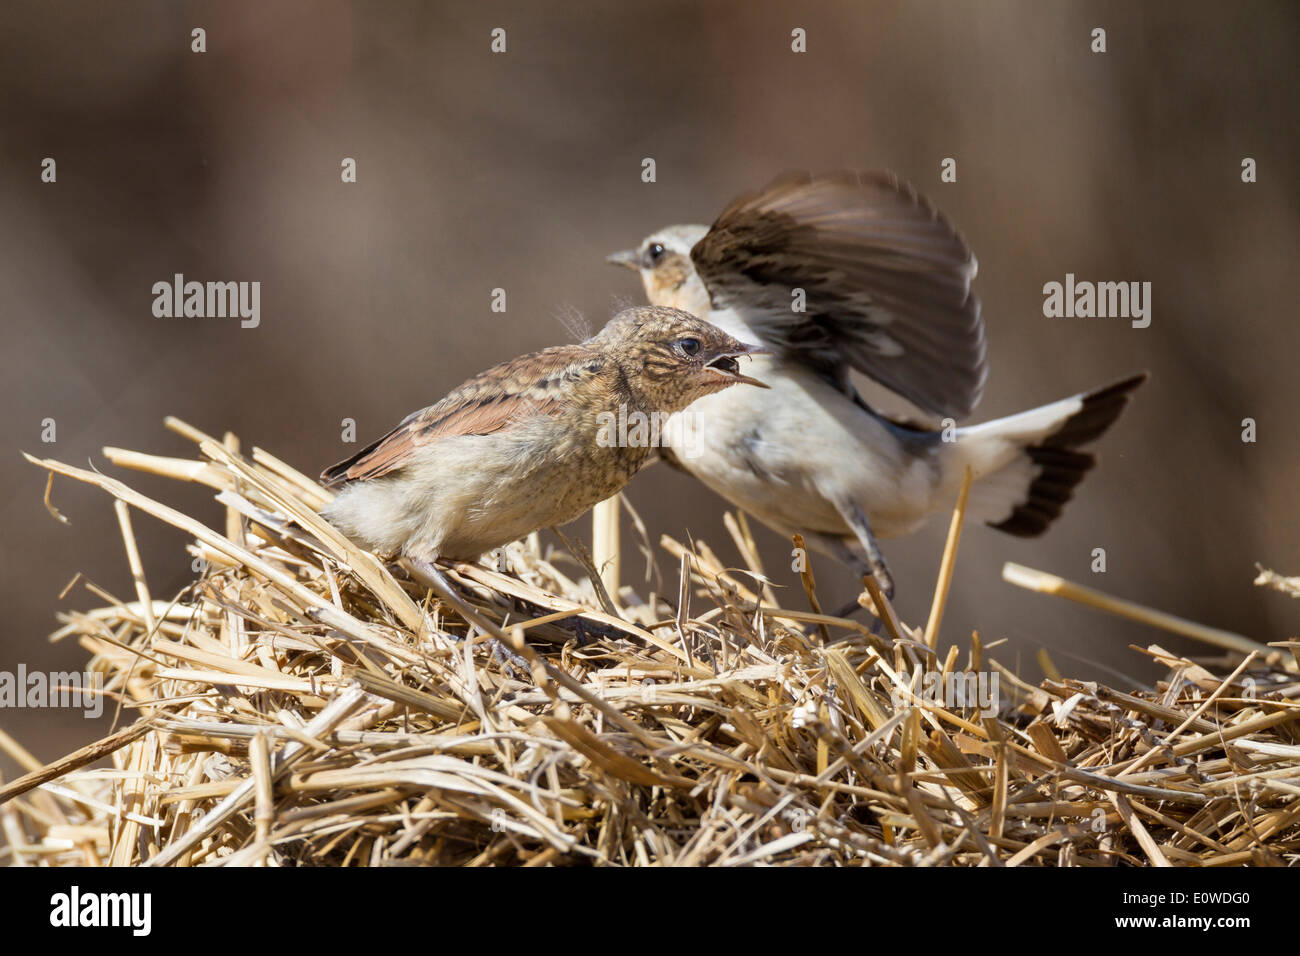 Northern Wheatear (Oenanthe oenanthe). Chick in nest, swallowing an insect. Austria Stock Photo